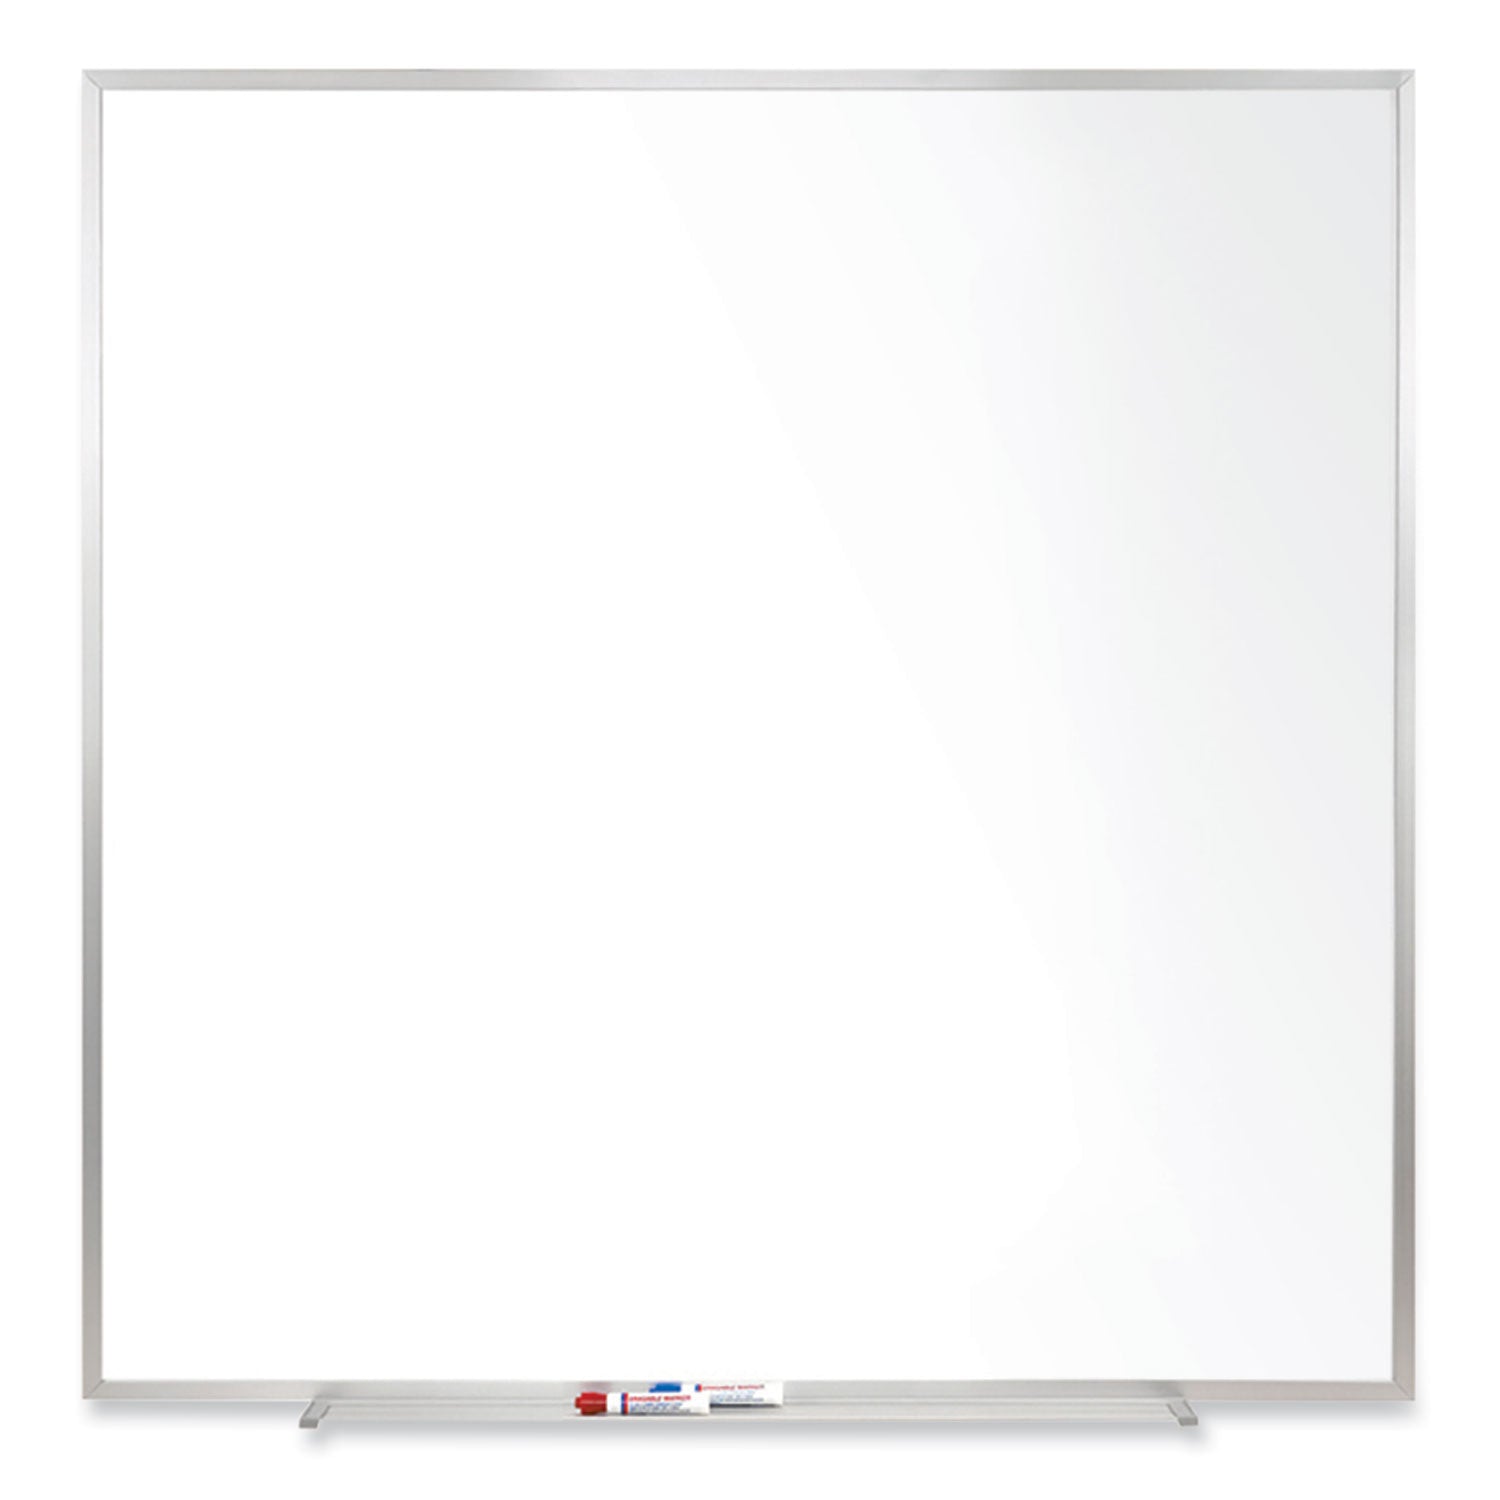 magnetic-porcelain-whiteboard-with-satin-aluminum-frame-485-x-485-white-surface-ships-in-7-10-business-days_ghem1444 - 1